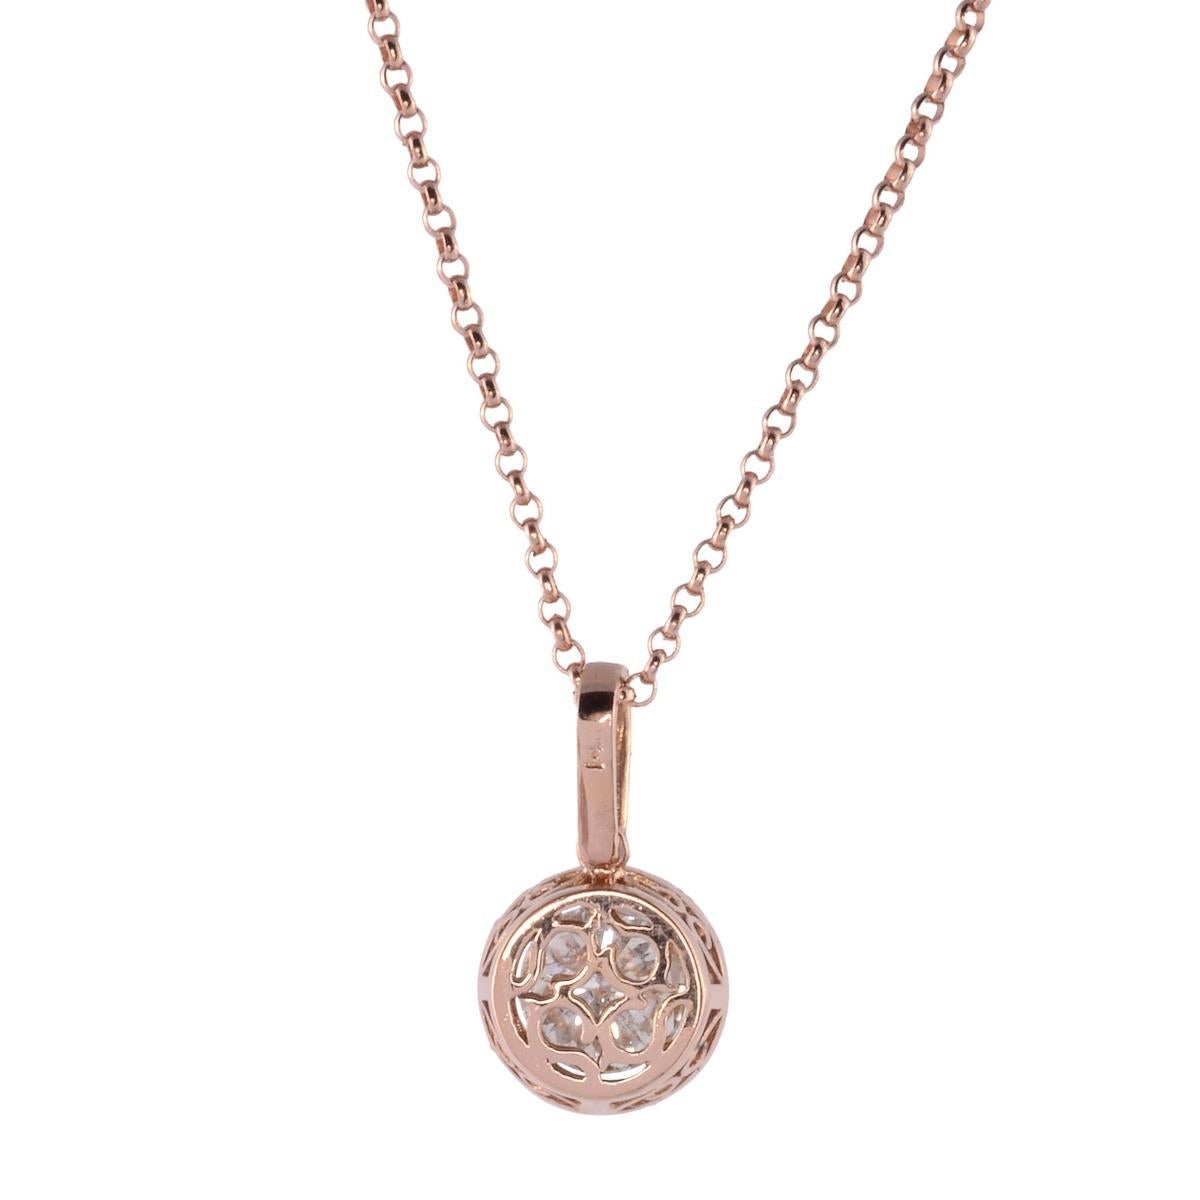 Estate 1.51 carat center diamond pendant on chain. This 14 karat rose gold pendant features a 1.51 carat round brilliant center diamond with VVS2 clarity and M color. The center diamond is encircled with round brilliant diamonds that extend to the